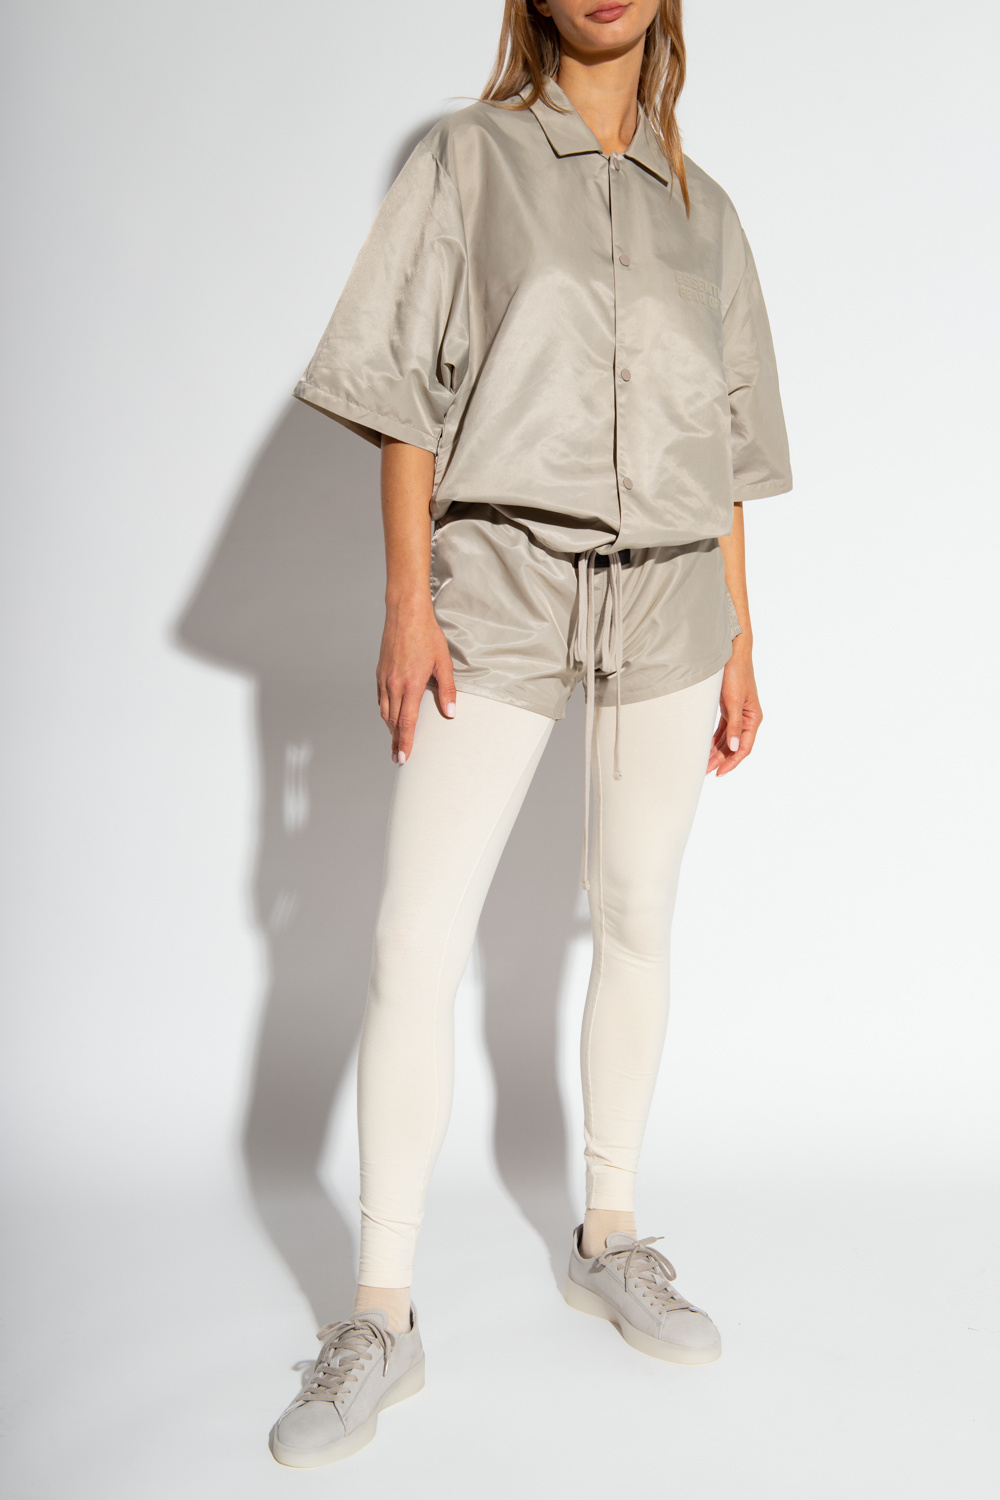 Women's Clothing | Fear Of God Essentials Shirt essential with 